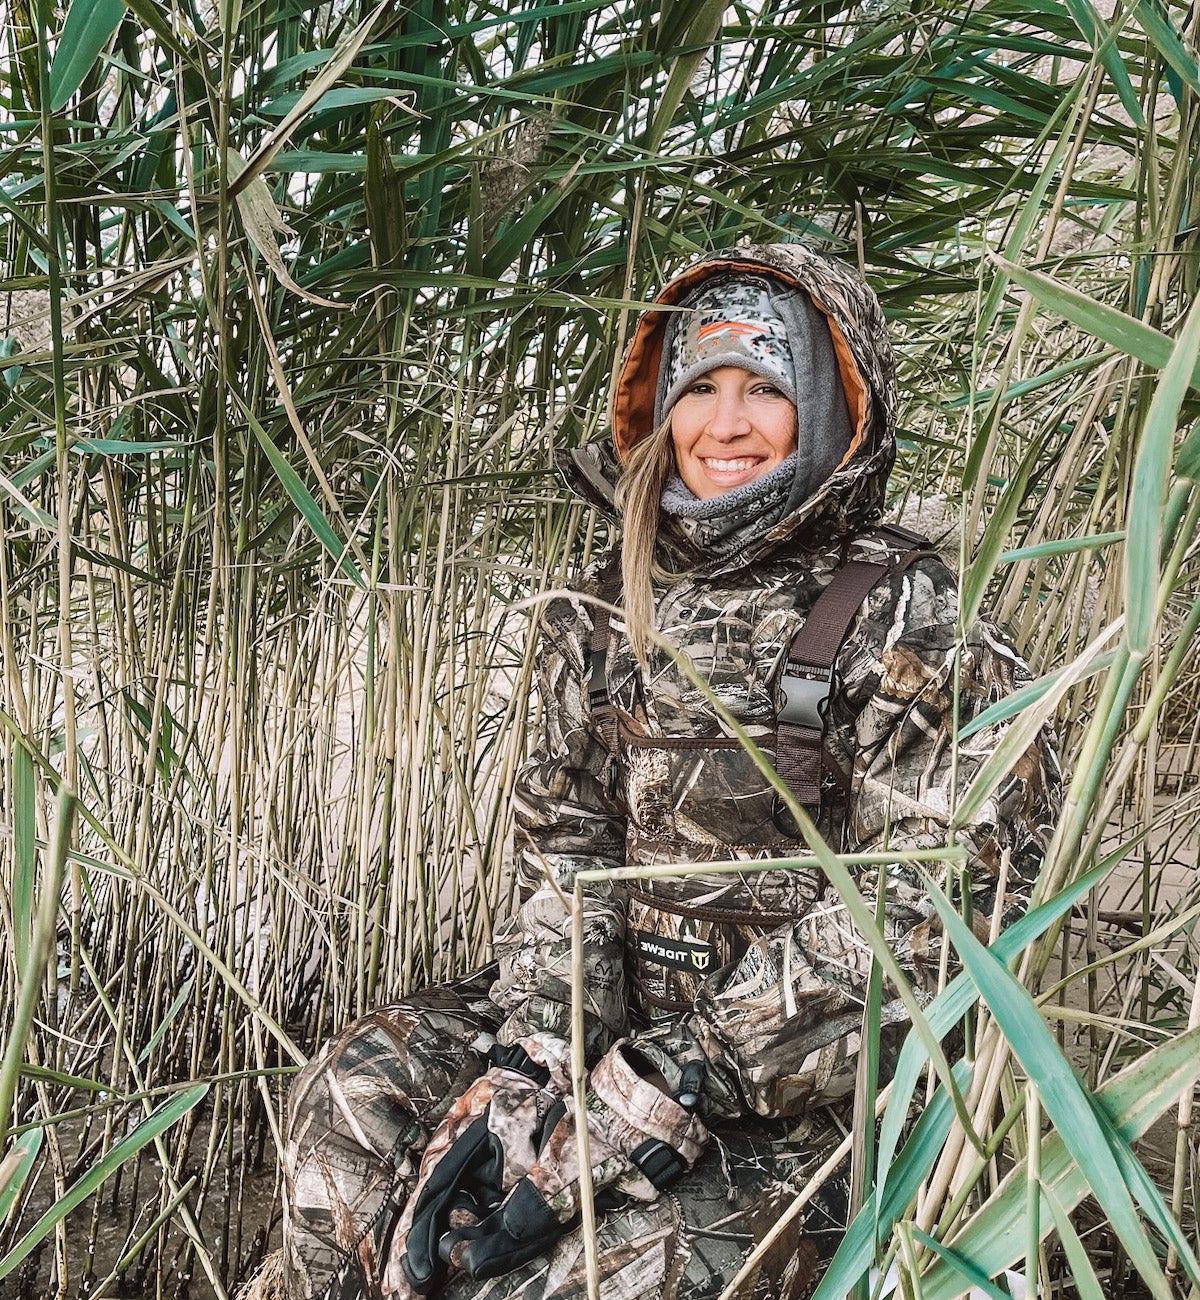 Northern Hunting - Hunting jackets for women in new and strong designs